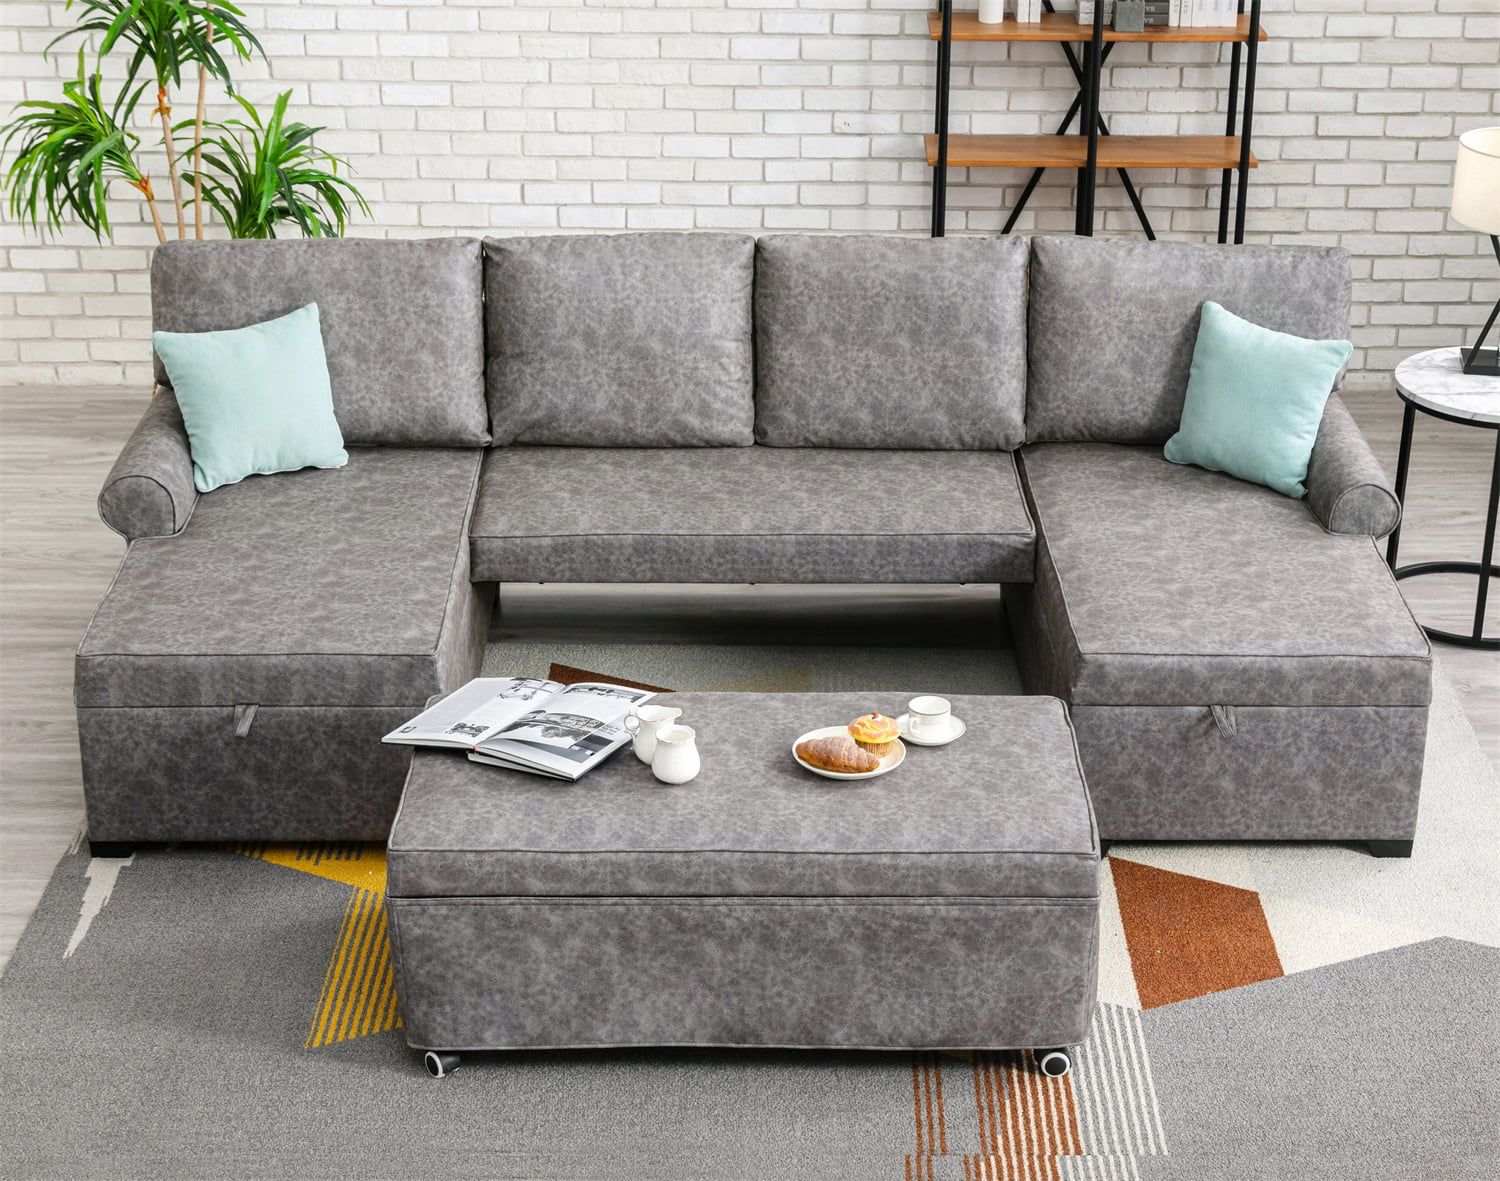 108.75" U Shaped Sofa With Pull Out Bed, Reversible Sectional Sofa With 2  Storage Chaise Lounges And 2 Usb Charging Ports, Convertible Sleeper Sofa  Bed 6 Seater Sofa Sets For Living Room, Gray – Walmart For U Shaped Sectional Sofa With Pull Out Bed (Photo 7 of 15)